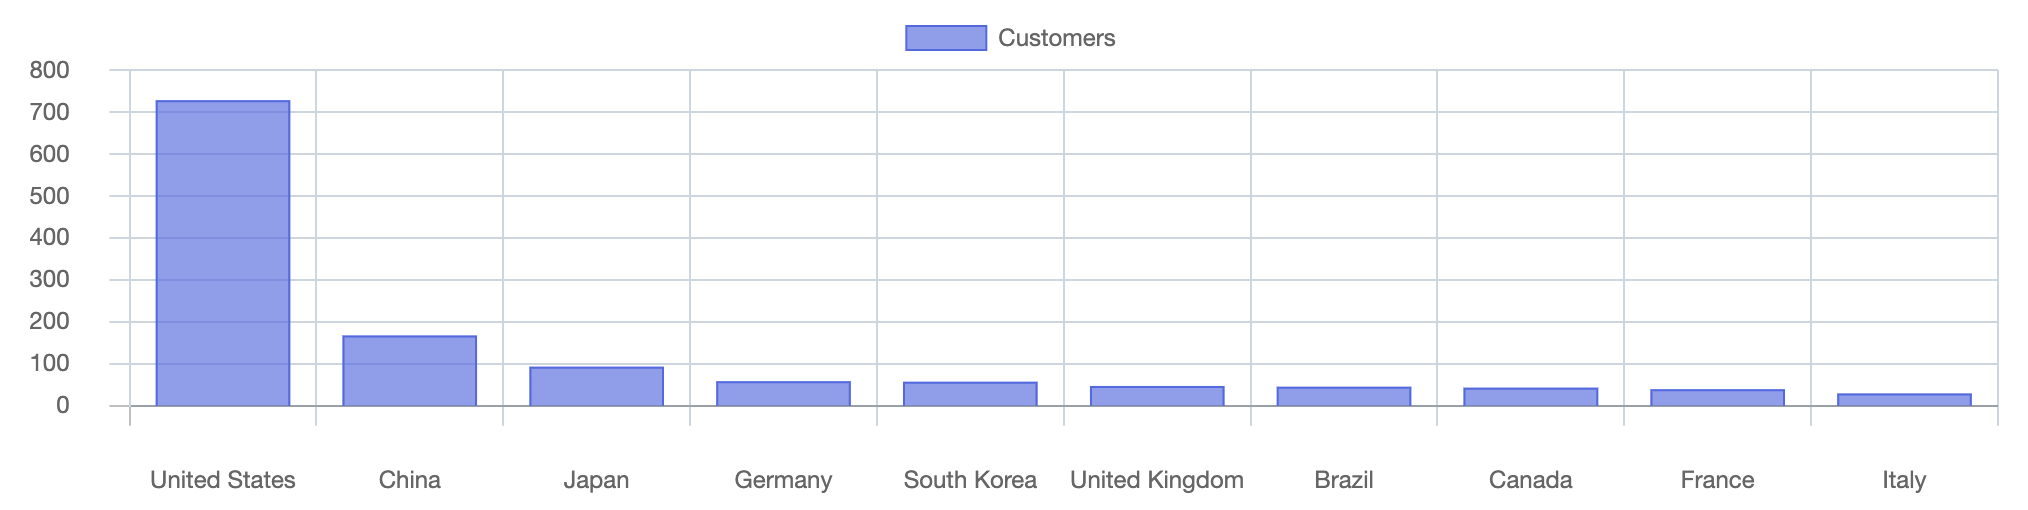 Customers by Country